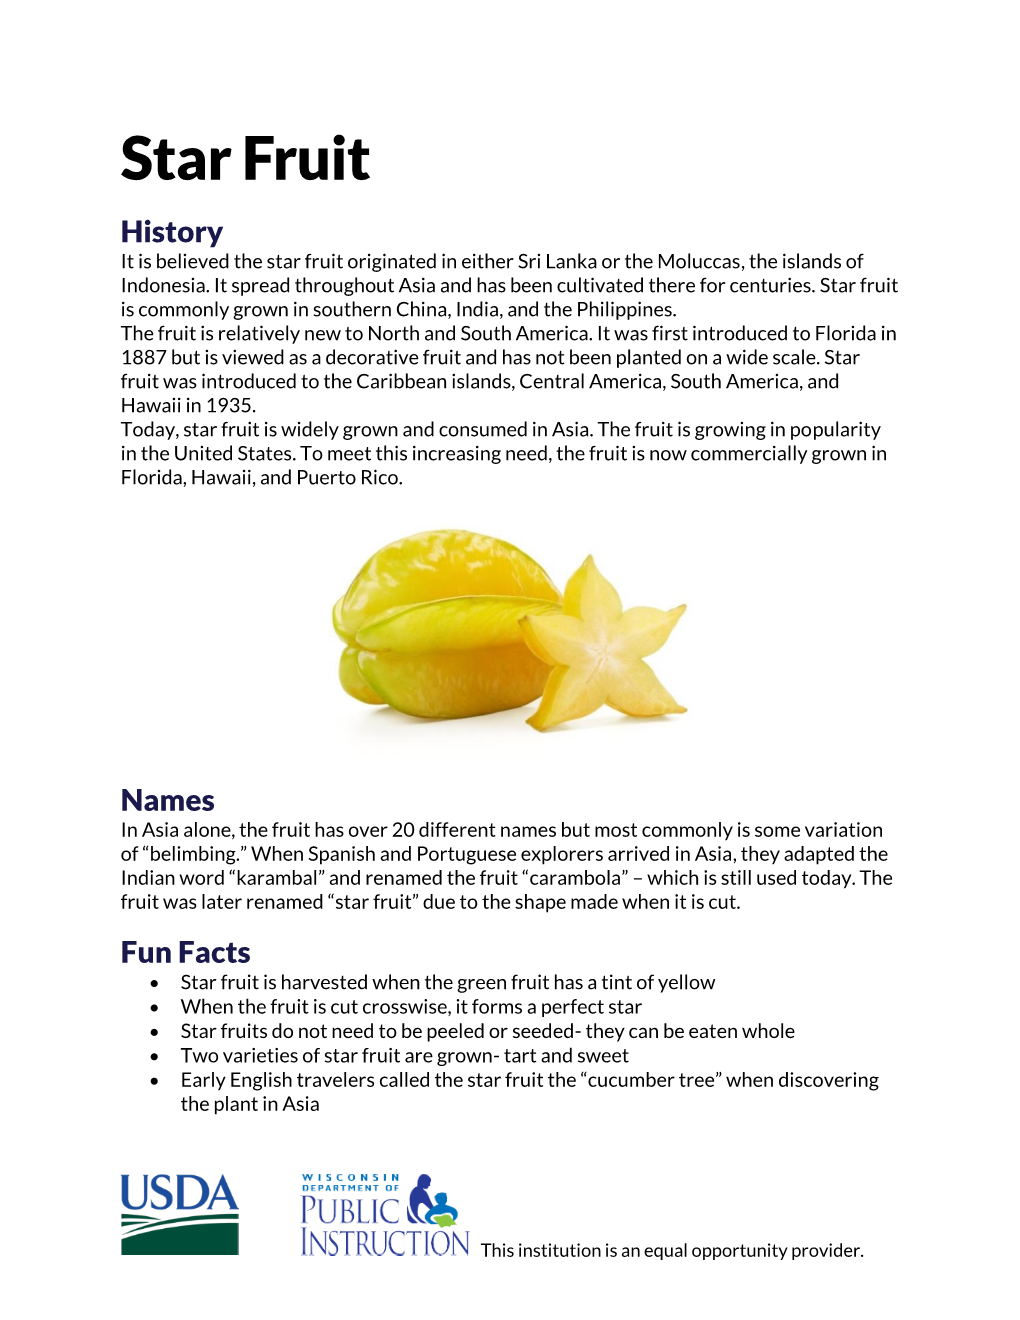 Star Fruit History It Is Believed the Star Fruit Originated in Either Sri Lanka Or the Moluccas, the Islands of Indonesia